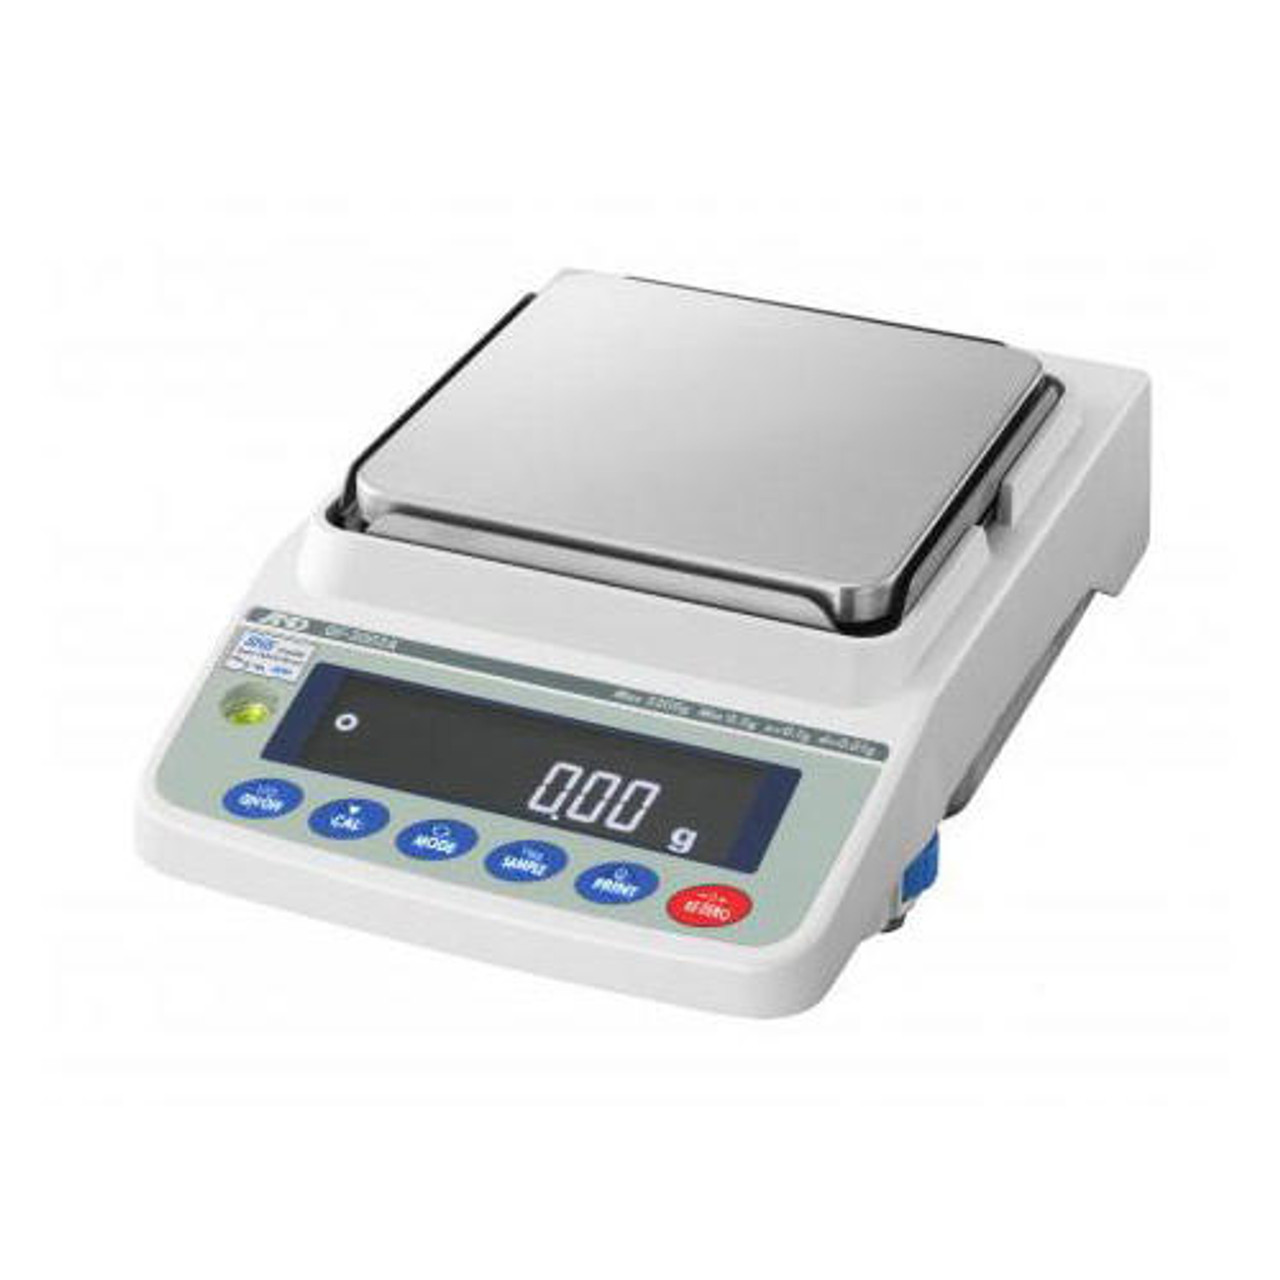 FX-3000IN Precision Scale from A&D Weighing